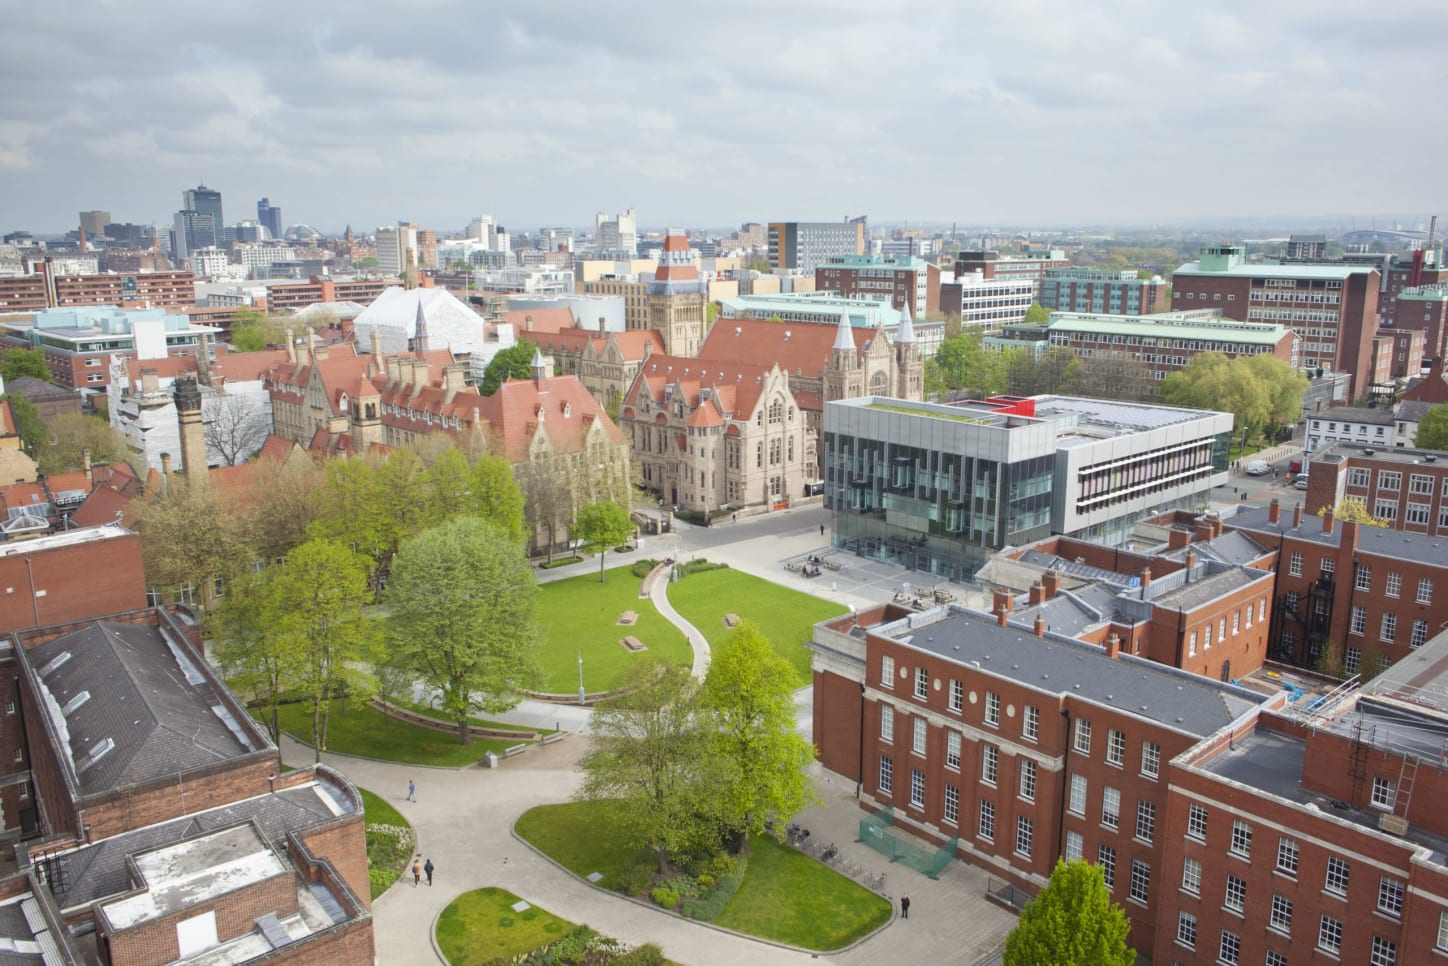 University of Manchester BA in English Literature